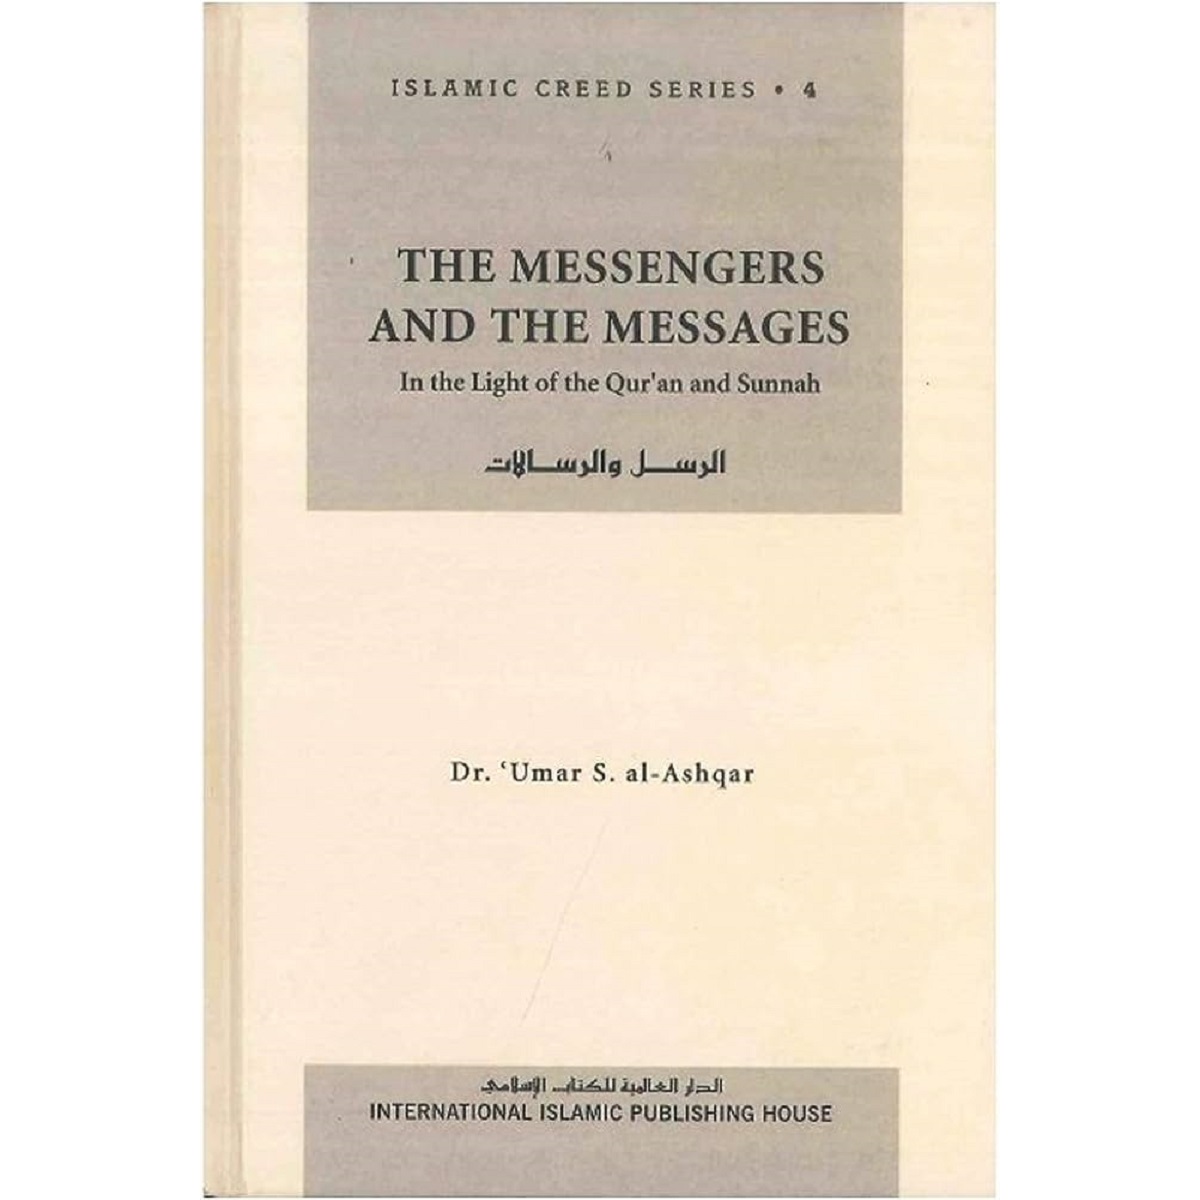 https://www.tarbiyahbooksplus.com/shop/hadith-and-sunnah/the-messengers-and-the-messages/